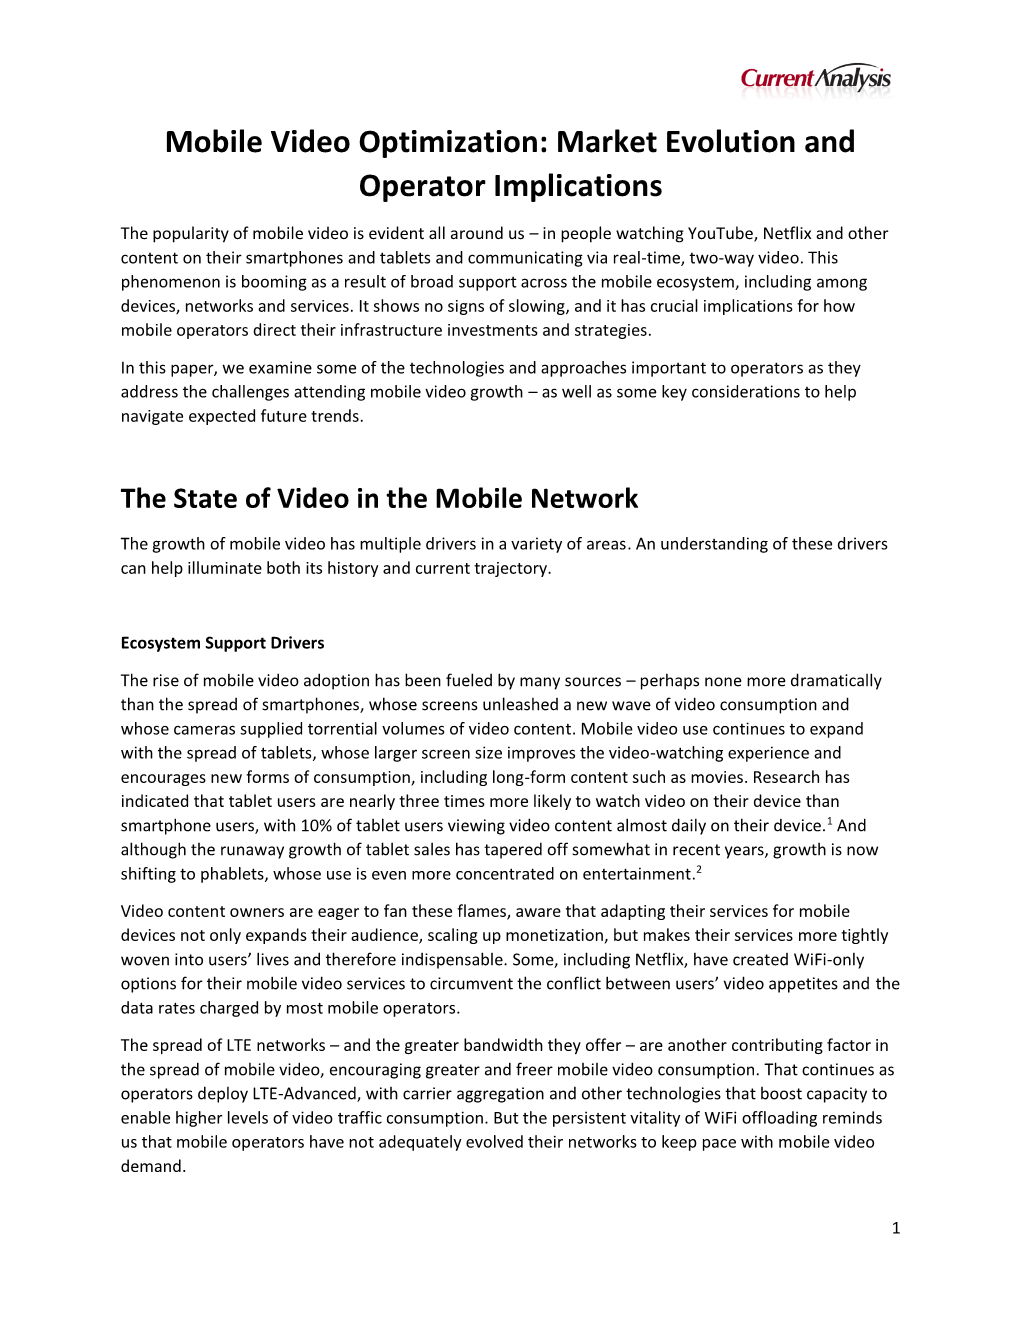 Mobile Video Optimization: Market Evolution and Operator Implications